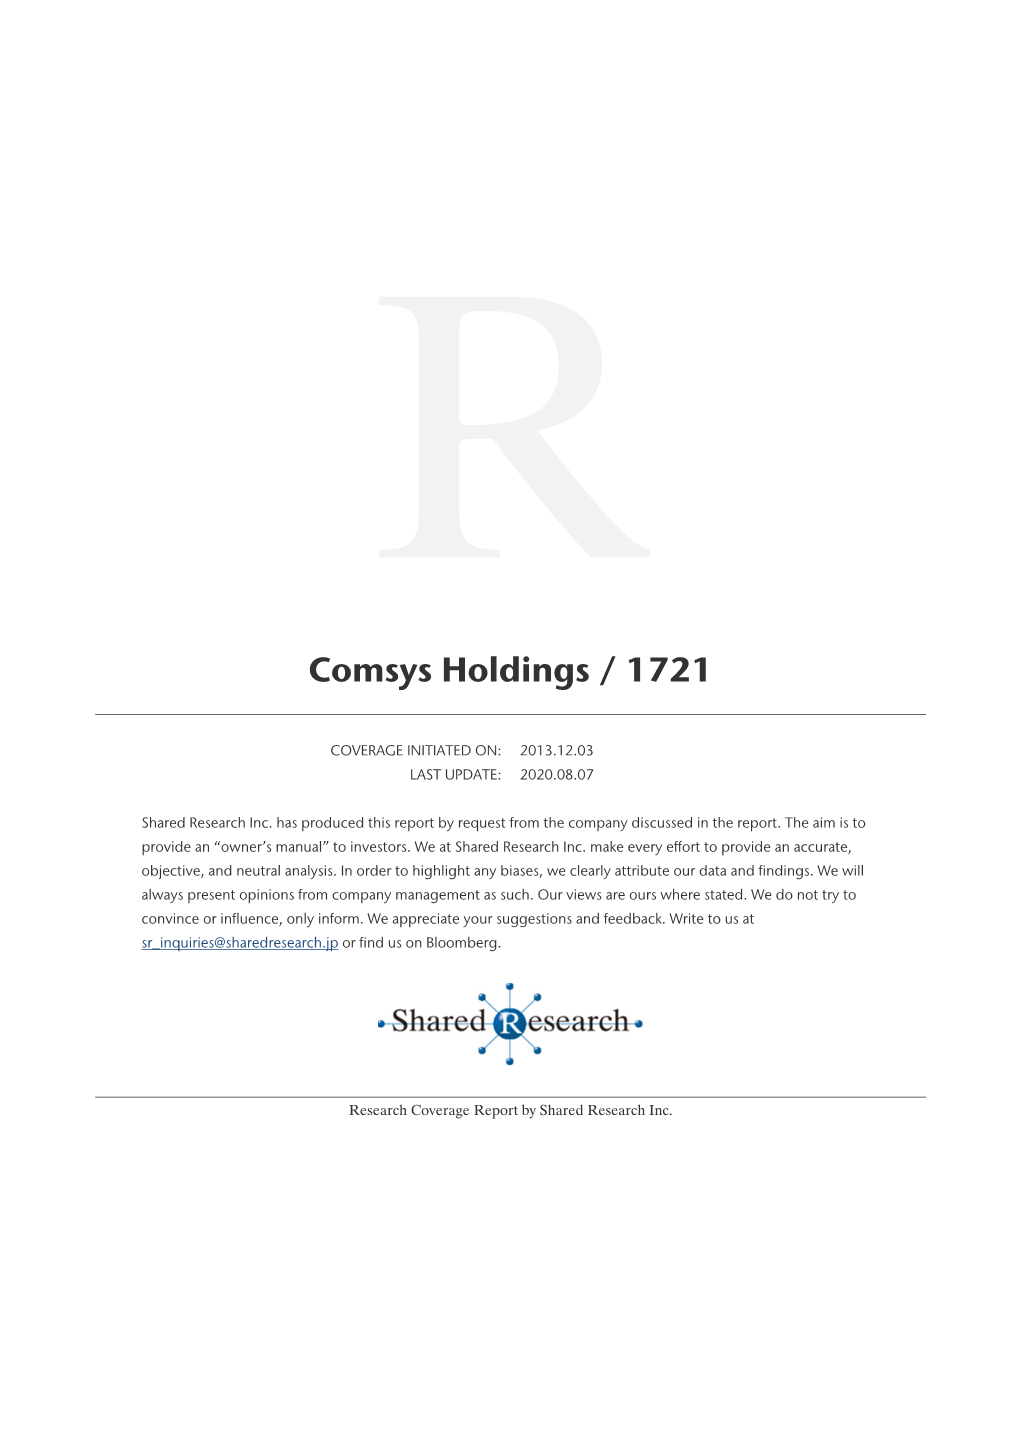 Comsys Holdings / 1721